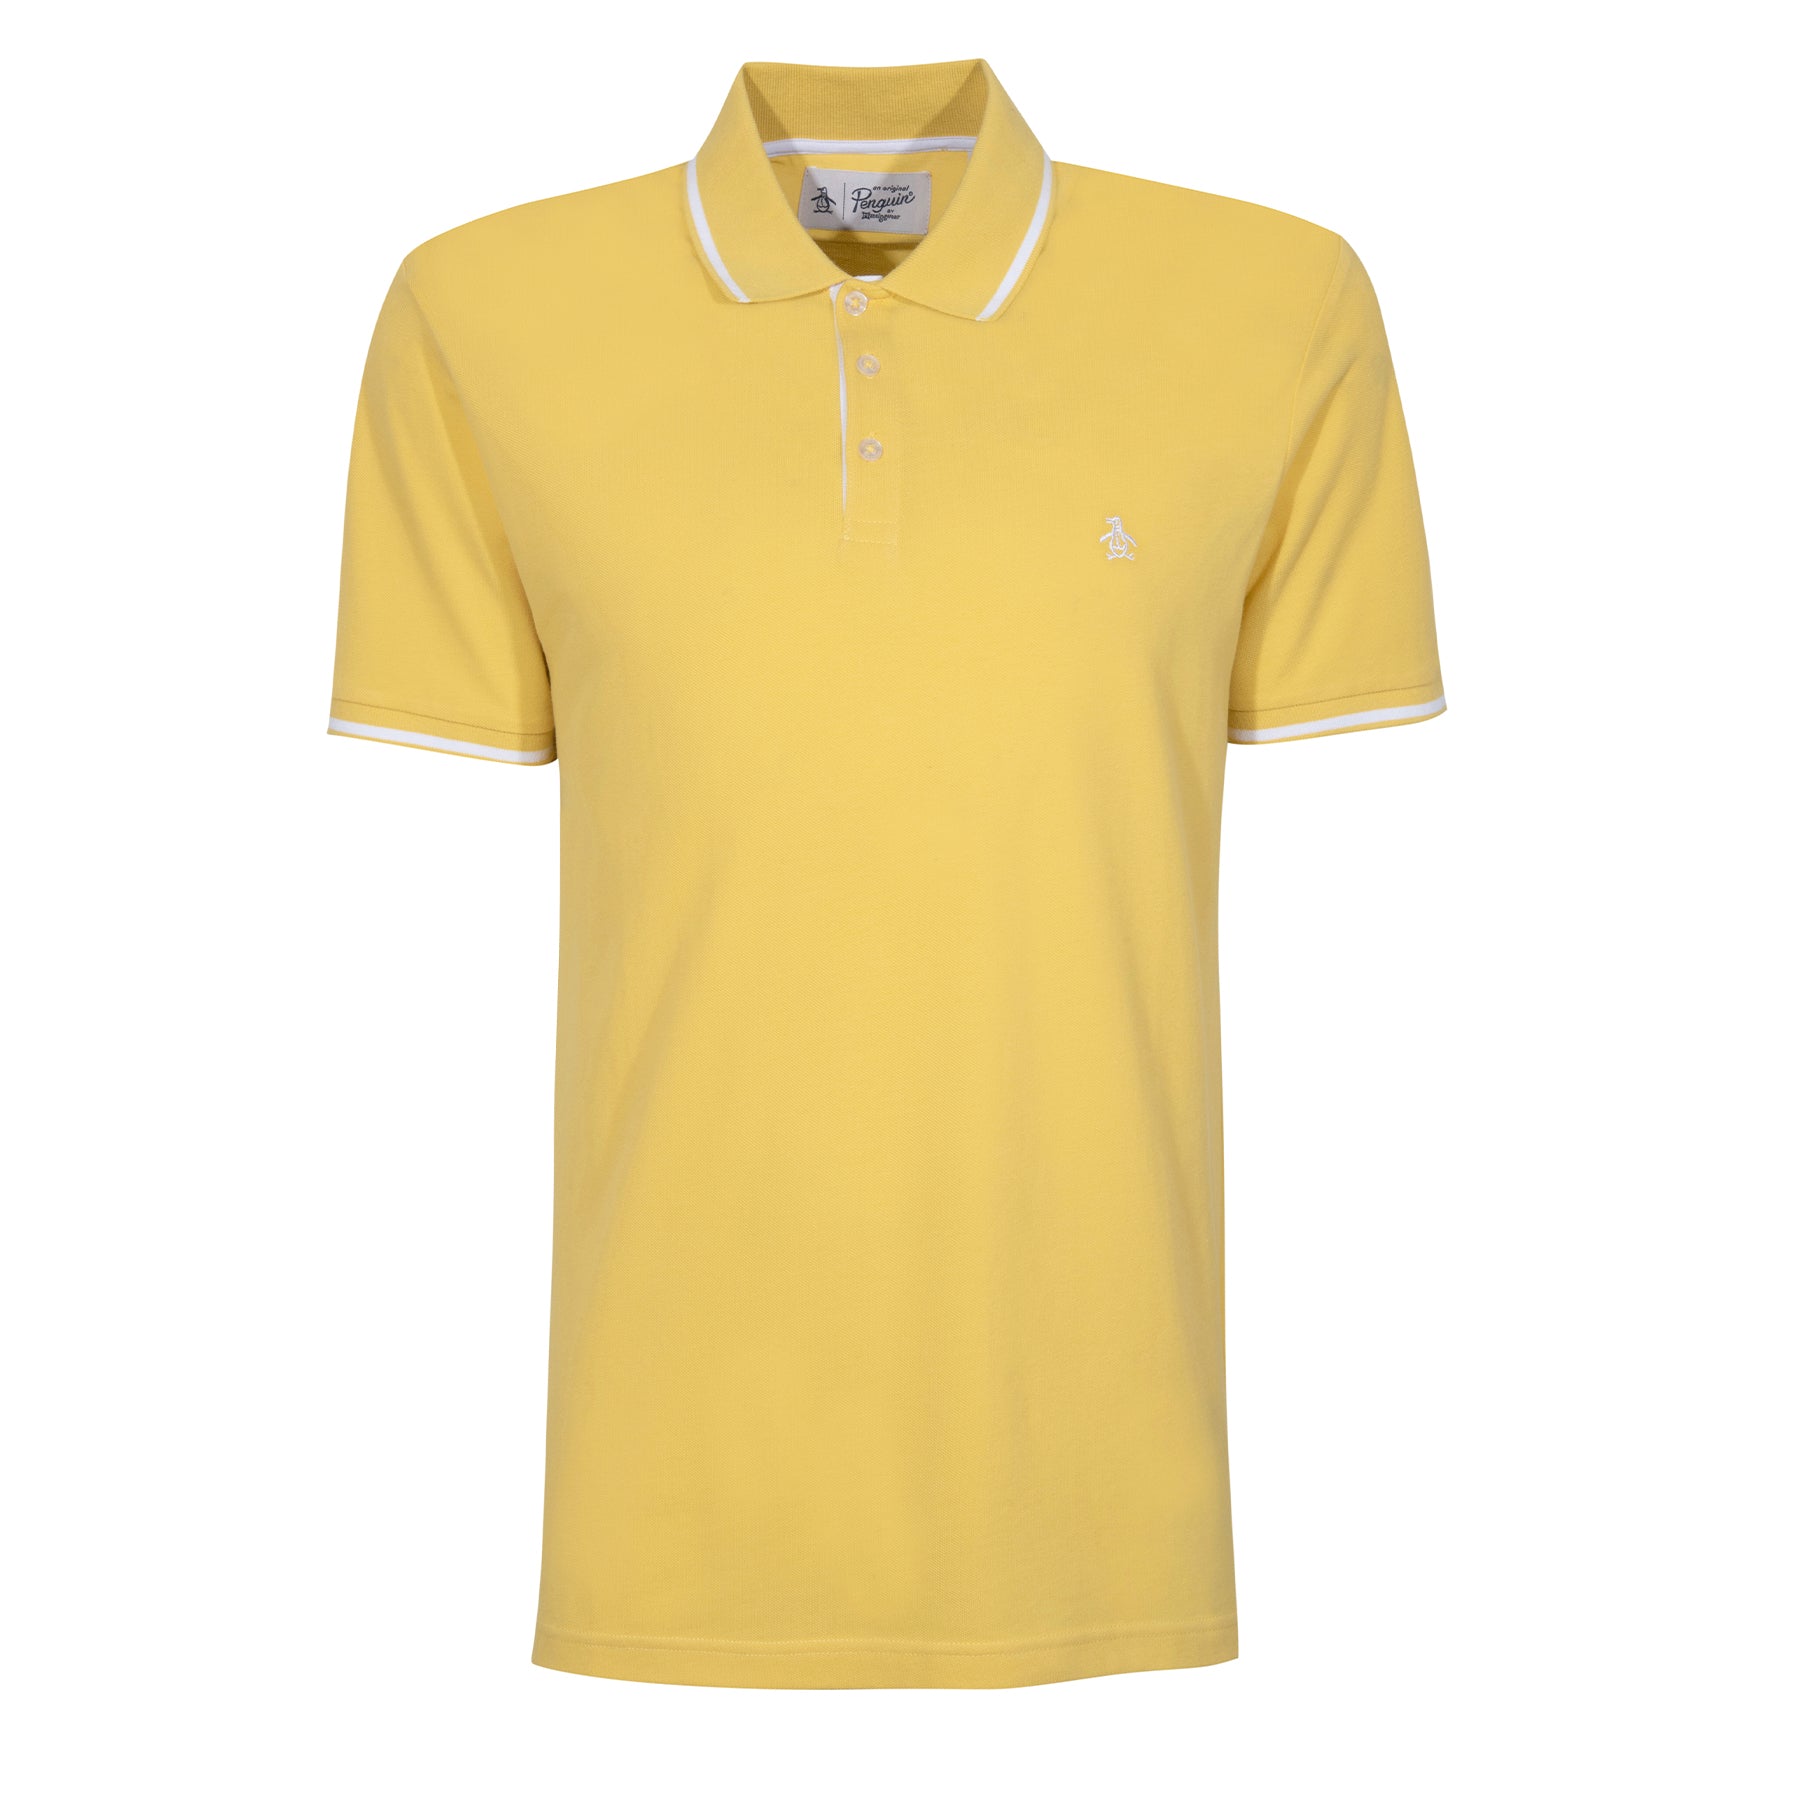 View Short Sleeve Tipped Pique Polo Shirt In Cream Gold information